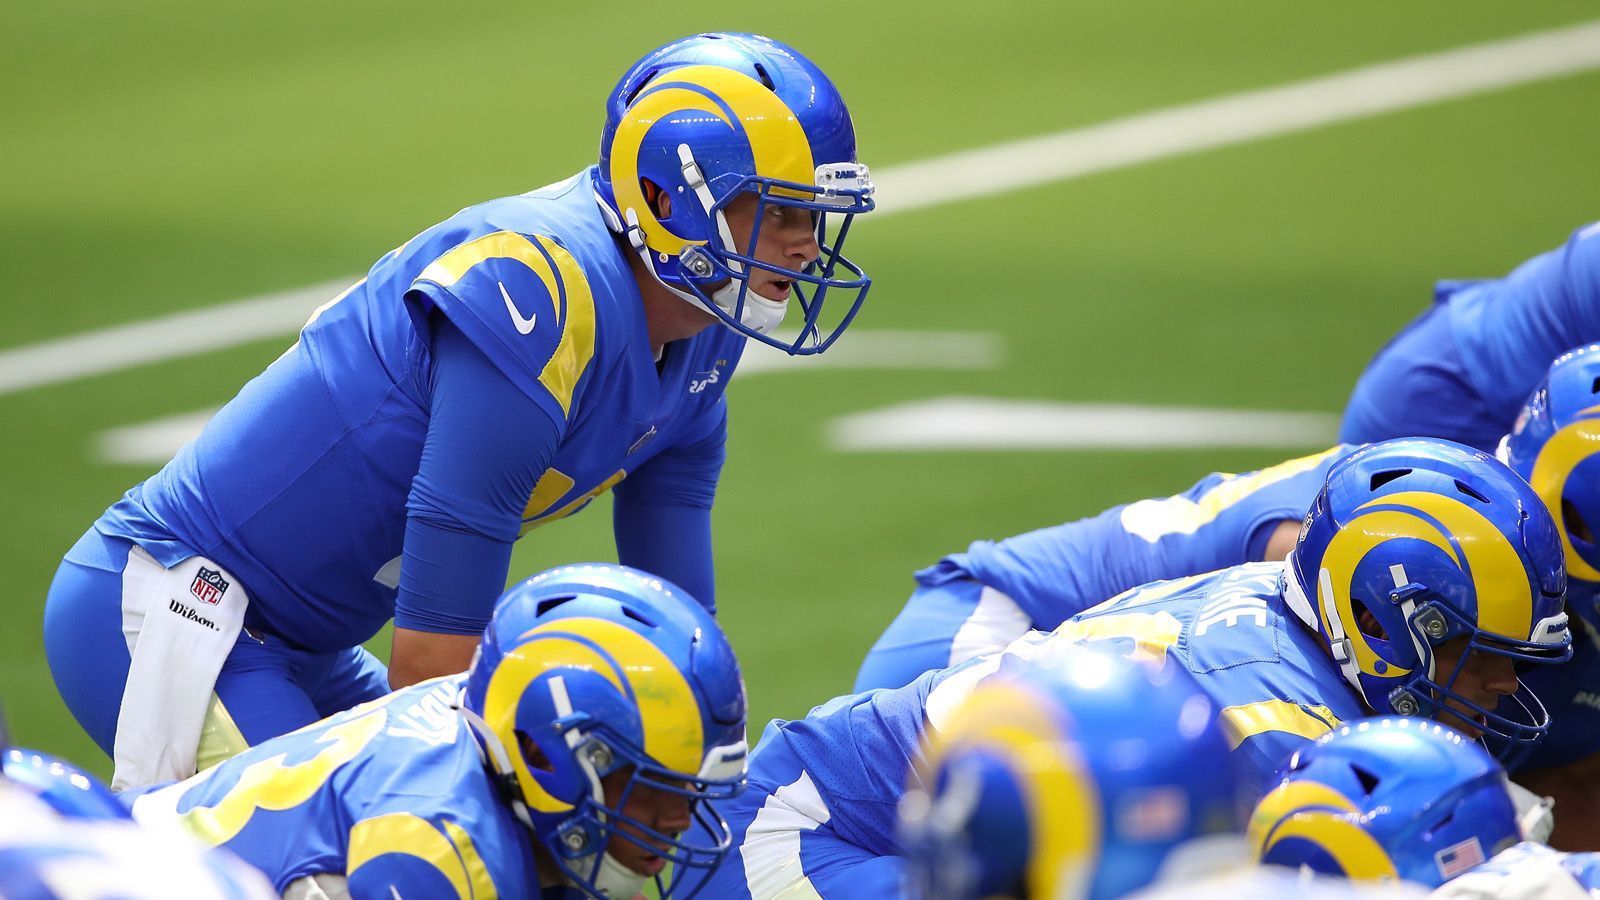 
                <strong>Los Angeles Rams</strong><br>
                Jared Goff (QB), Aaron Donald (DT), Andrew Whitworth (OT), Johnny Hekker (P), Robert Woods (WR), Cooper Kupp (WR), John Johnson (S), Michael Brockers (DT)
              